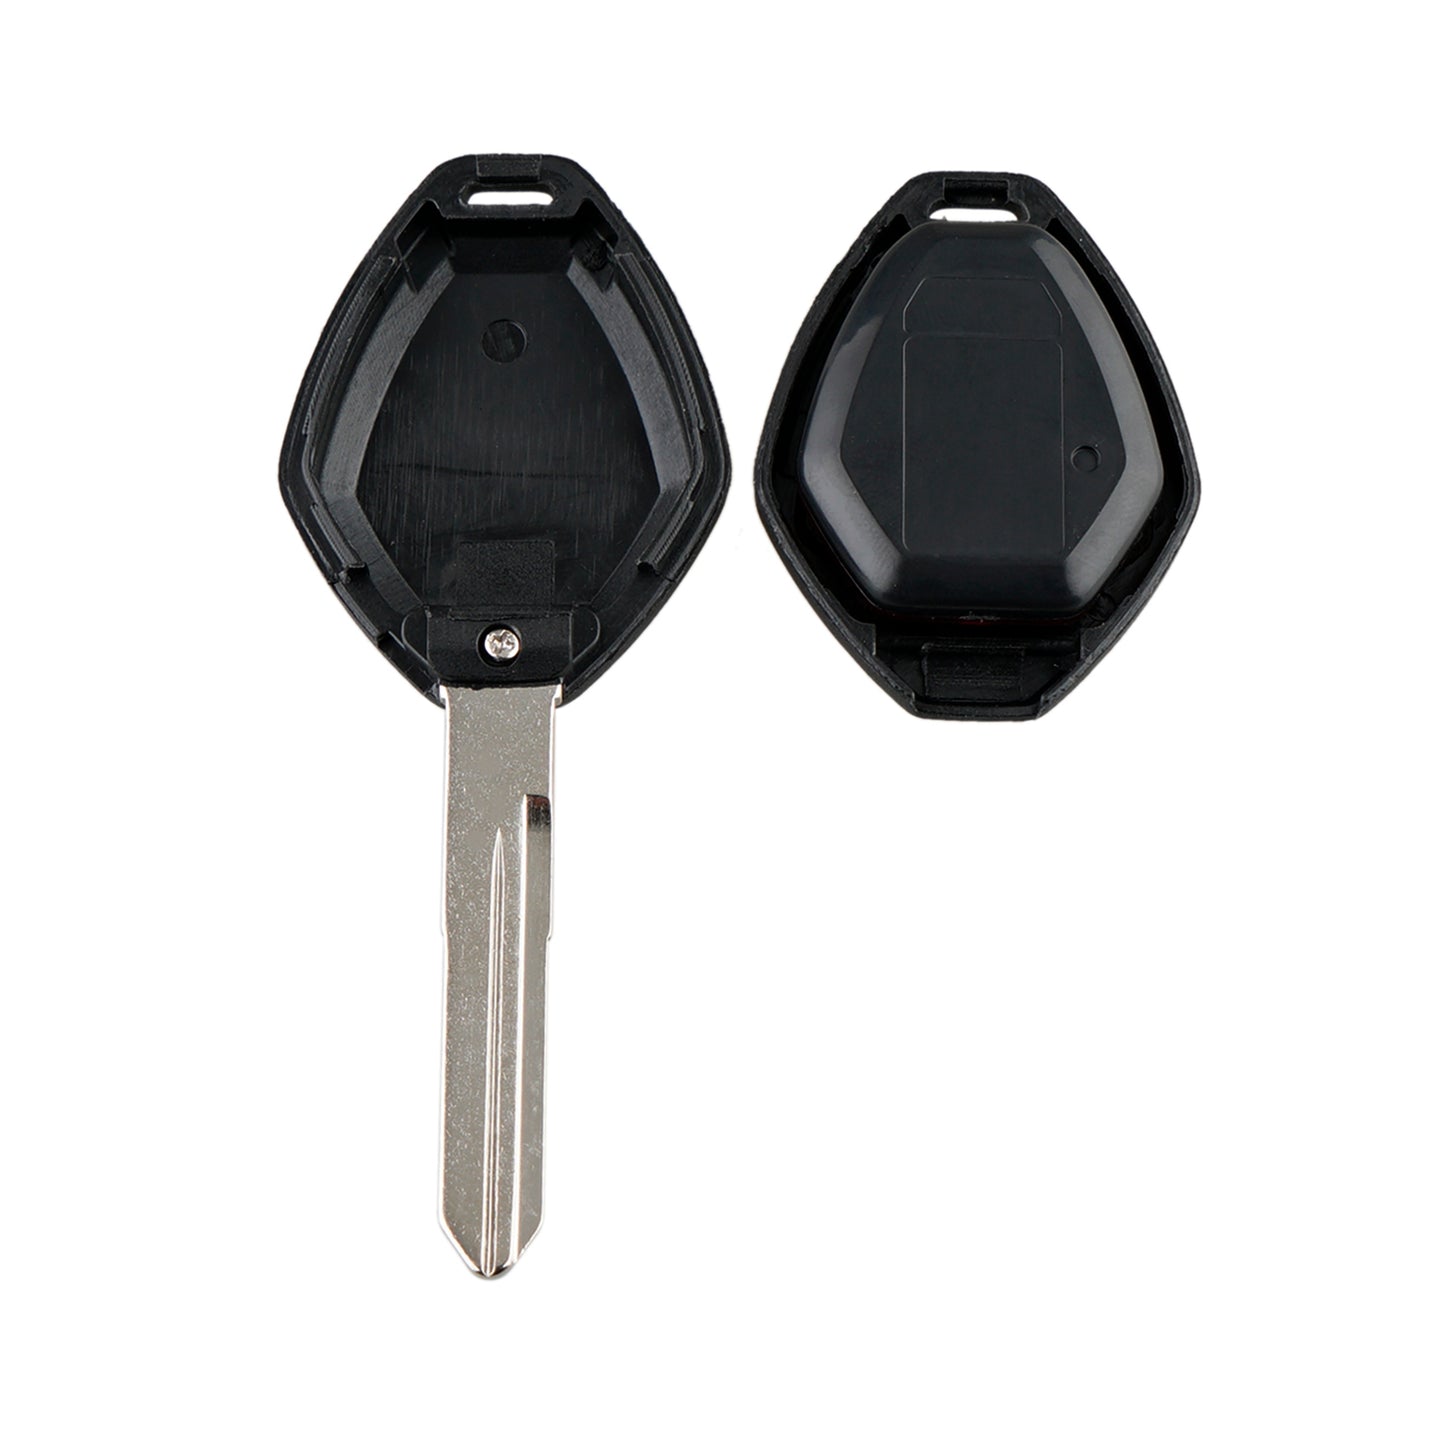 4 Buttons 315MHz Keyless Entry Fob Remote Car Key For 2006 - 2007 Mitsubishi Eclipse Galant FCC ID: OUCG8D-620M-A SKU : J106